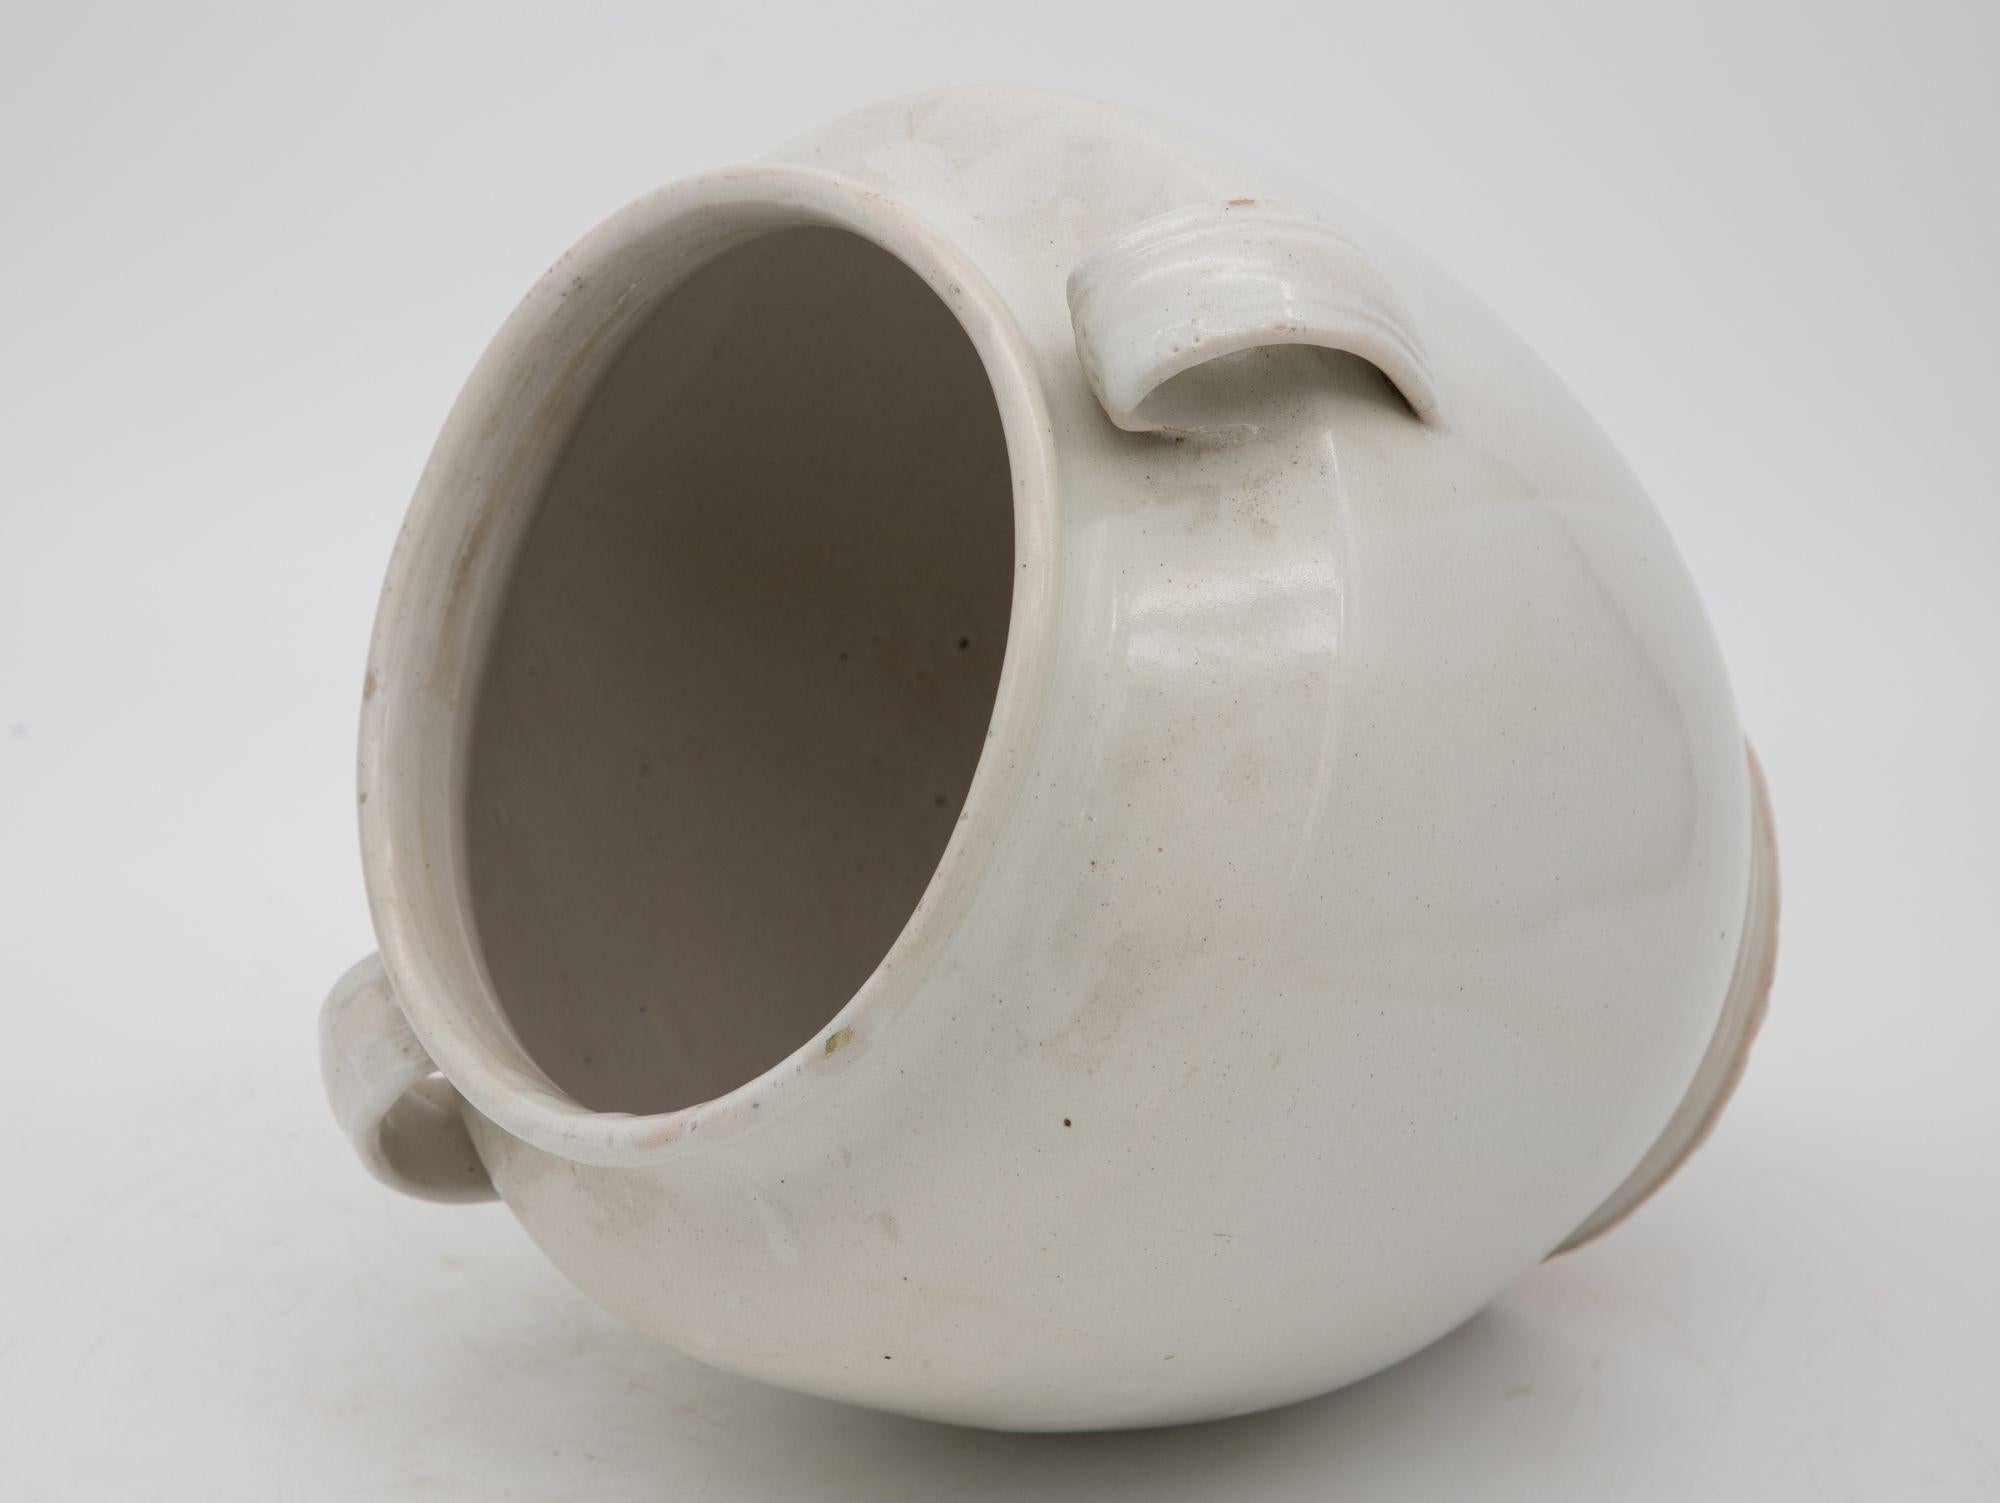 A 20th-century white pottery urn or confit pot. Wear consistent with age and use.